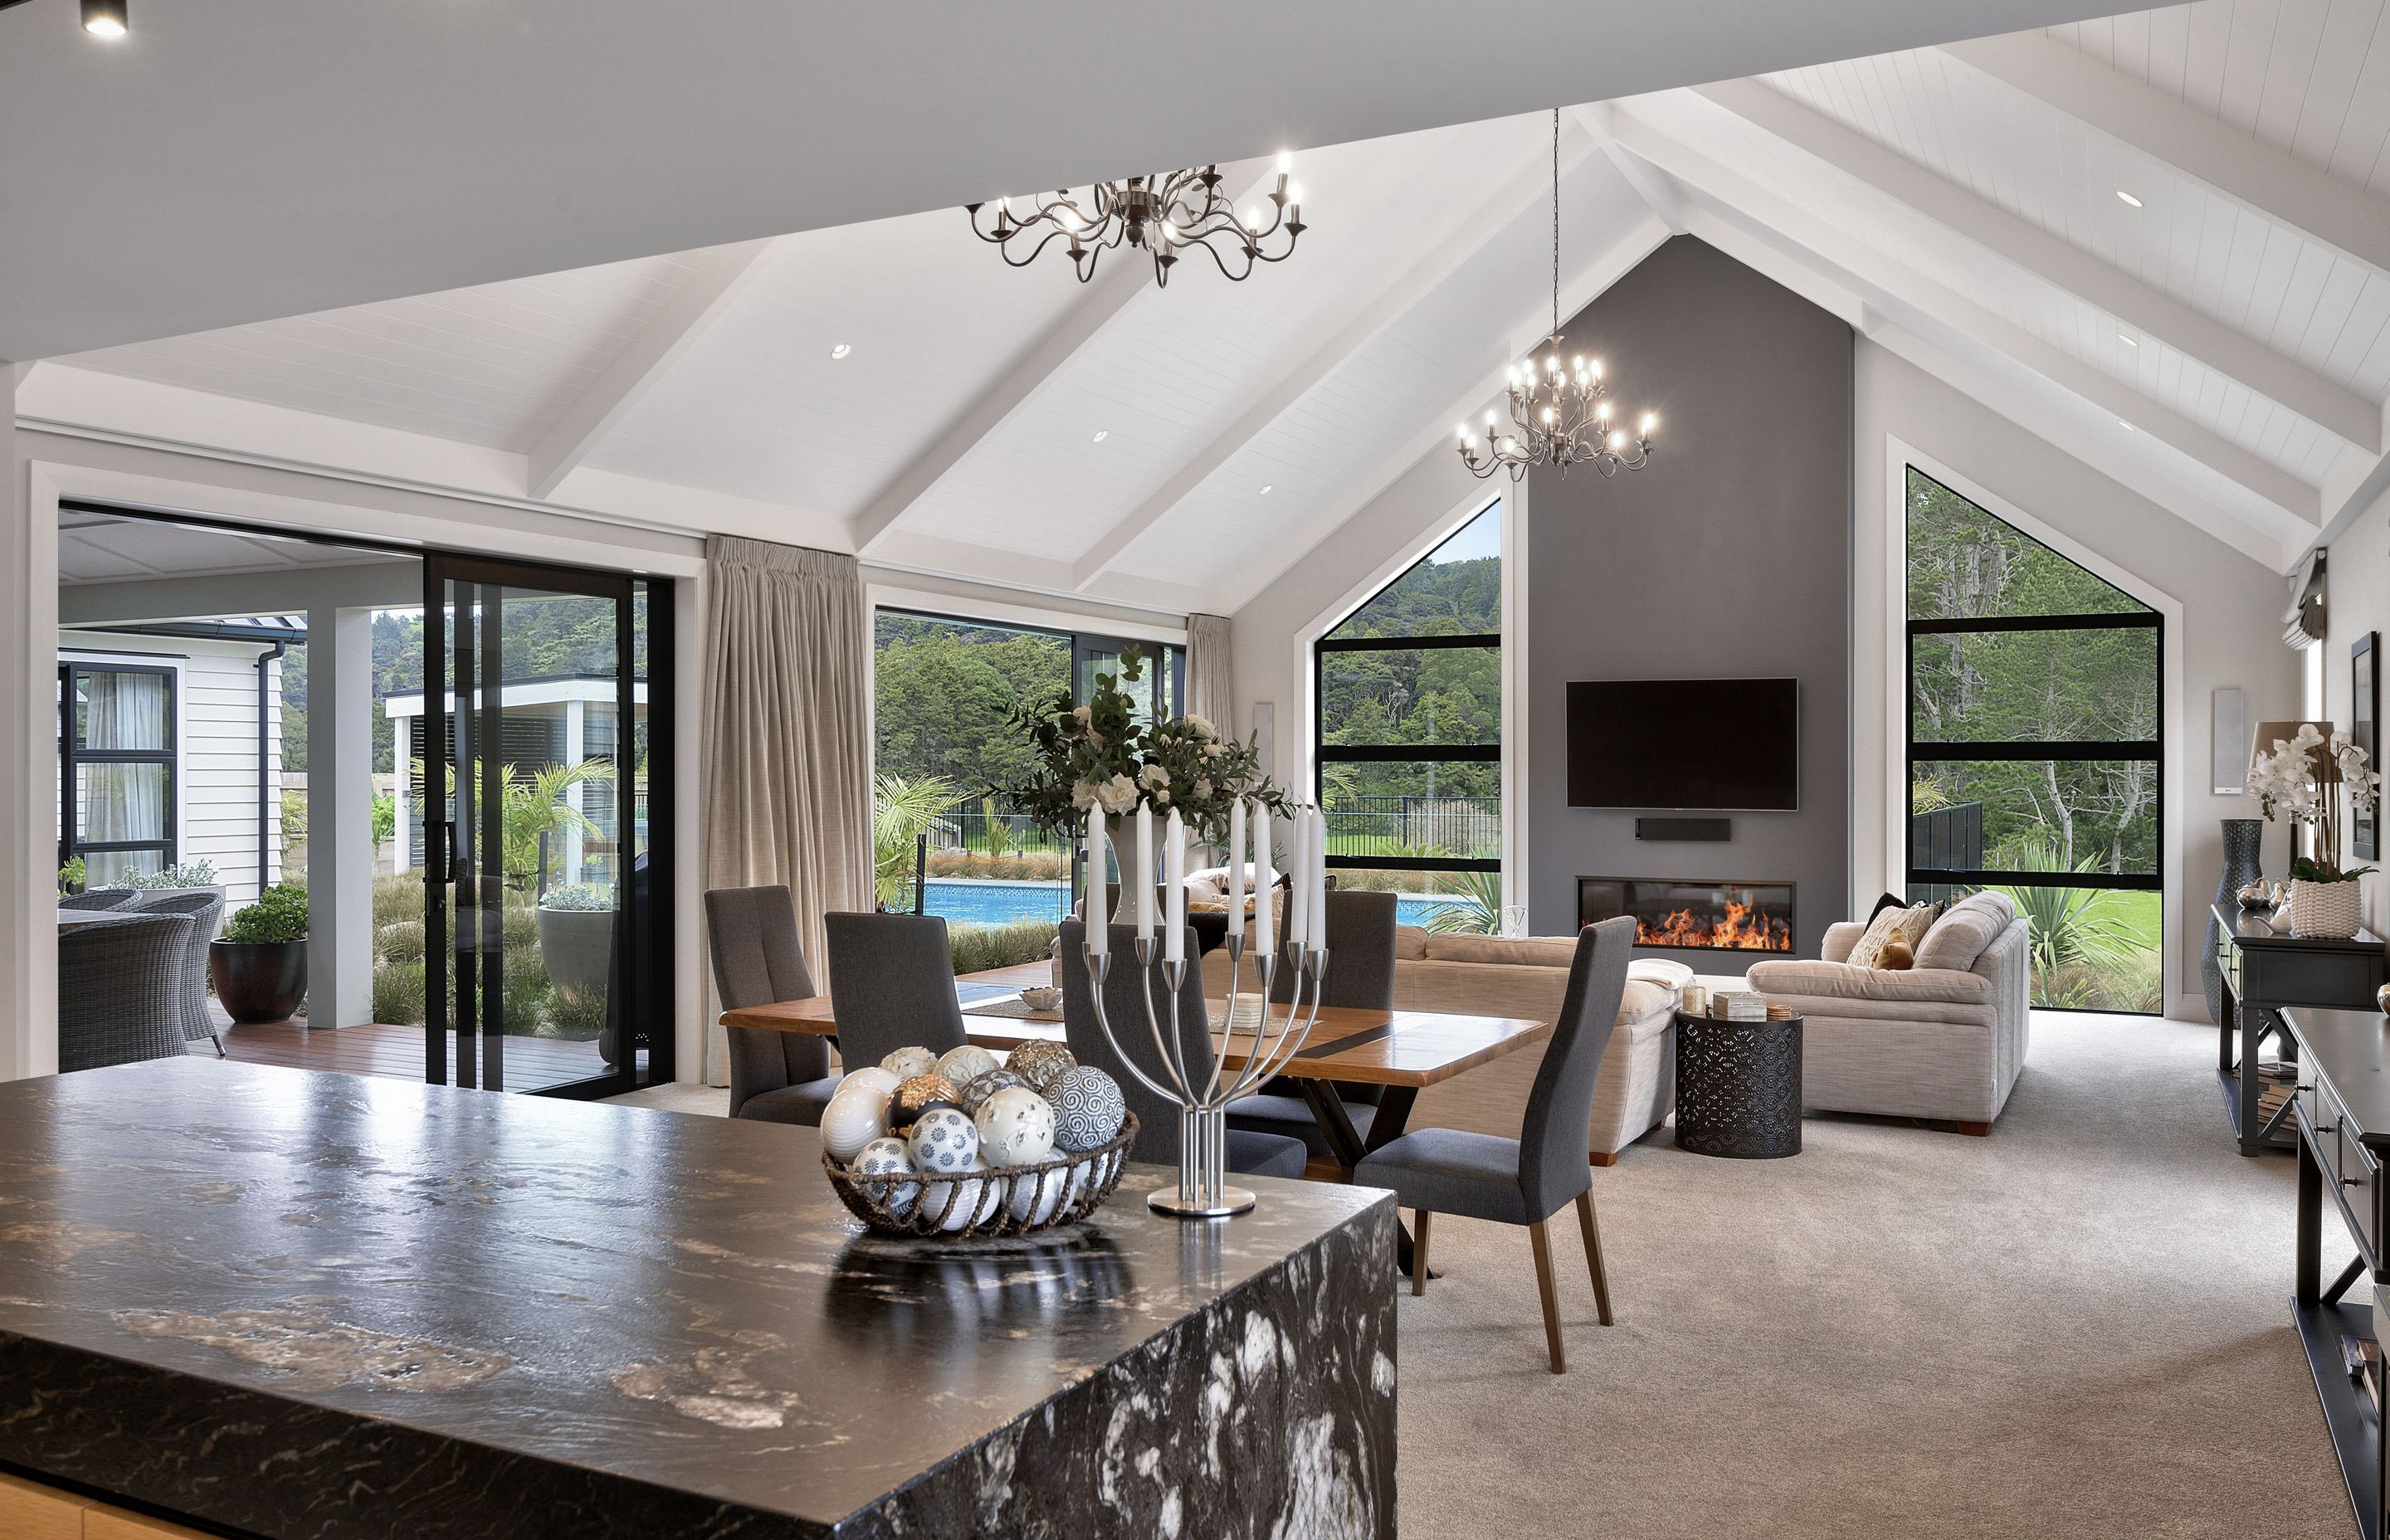 Within the larger wing, kitchen, dining and living areas sprawl across a grand room with spectacular high-pitched cathedral ceilings and extensive views of the native bush.